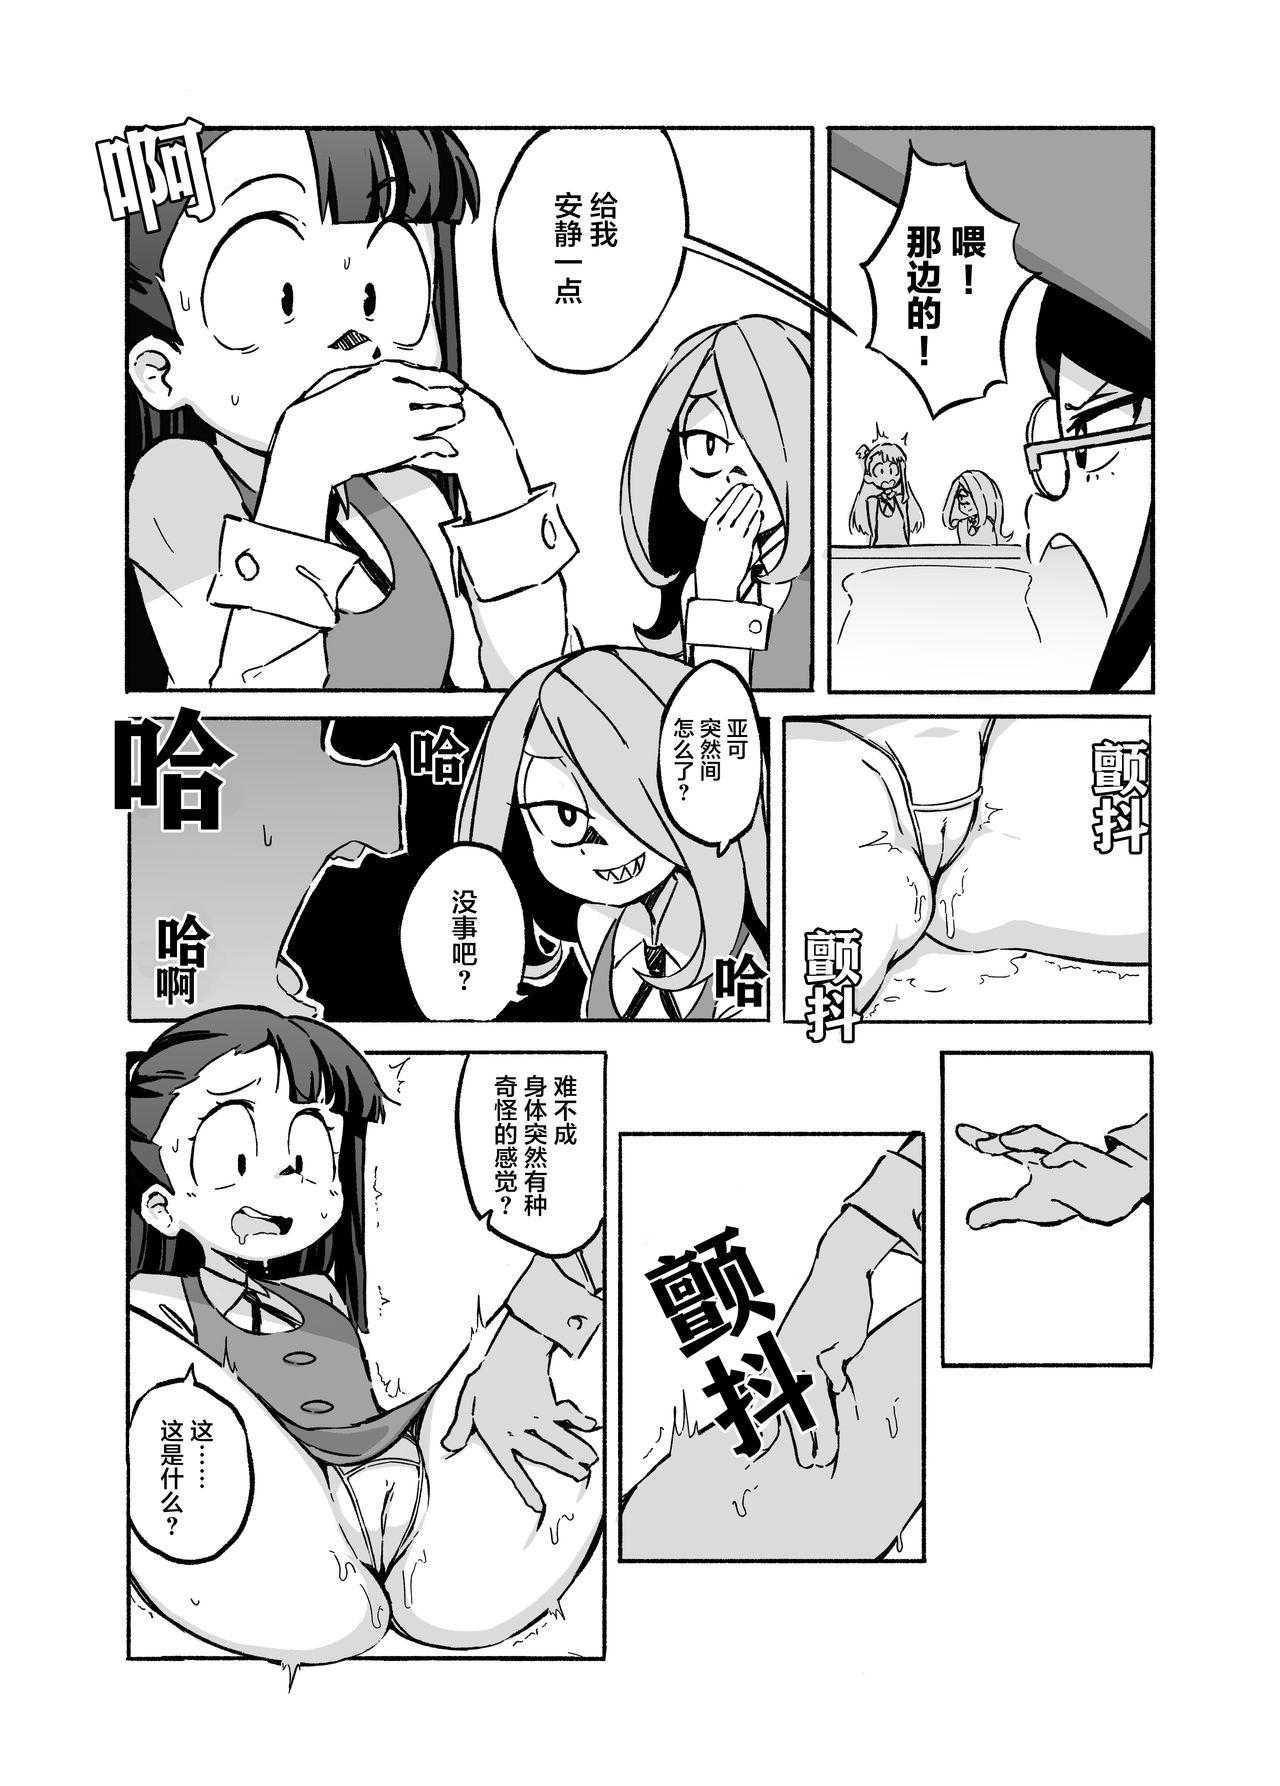 Cunt Mushroom Fever - Little witch academia Three Some - Page 9